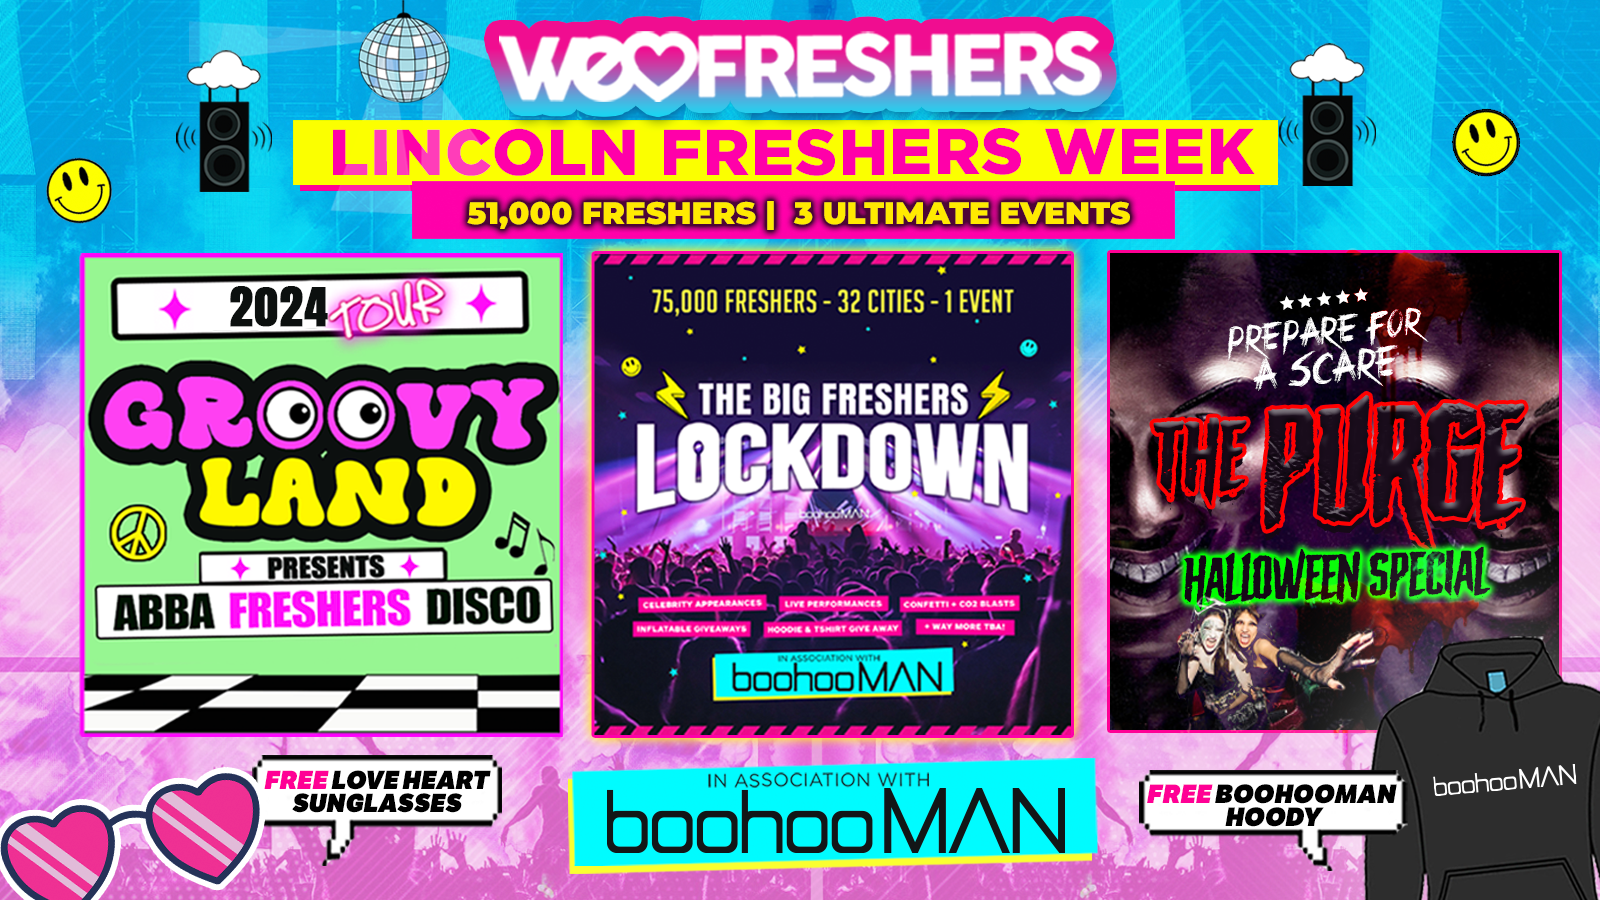 WE LOVE LINCOLN FRESHERS 2024 in association with boohooMAN❗3 EVENTS ❗